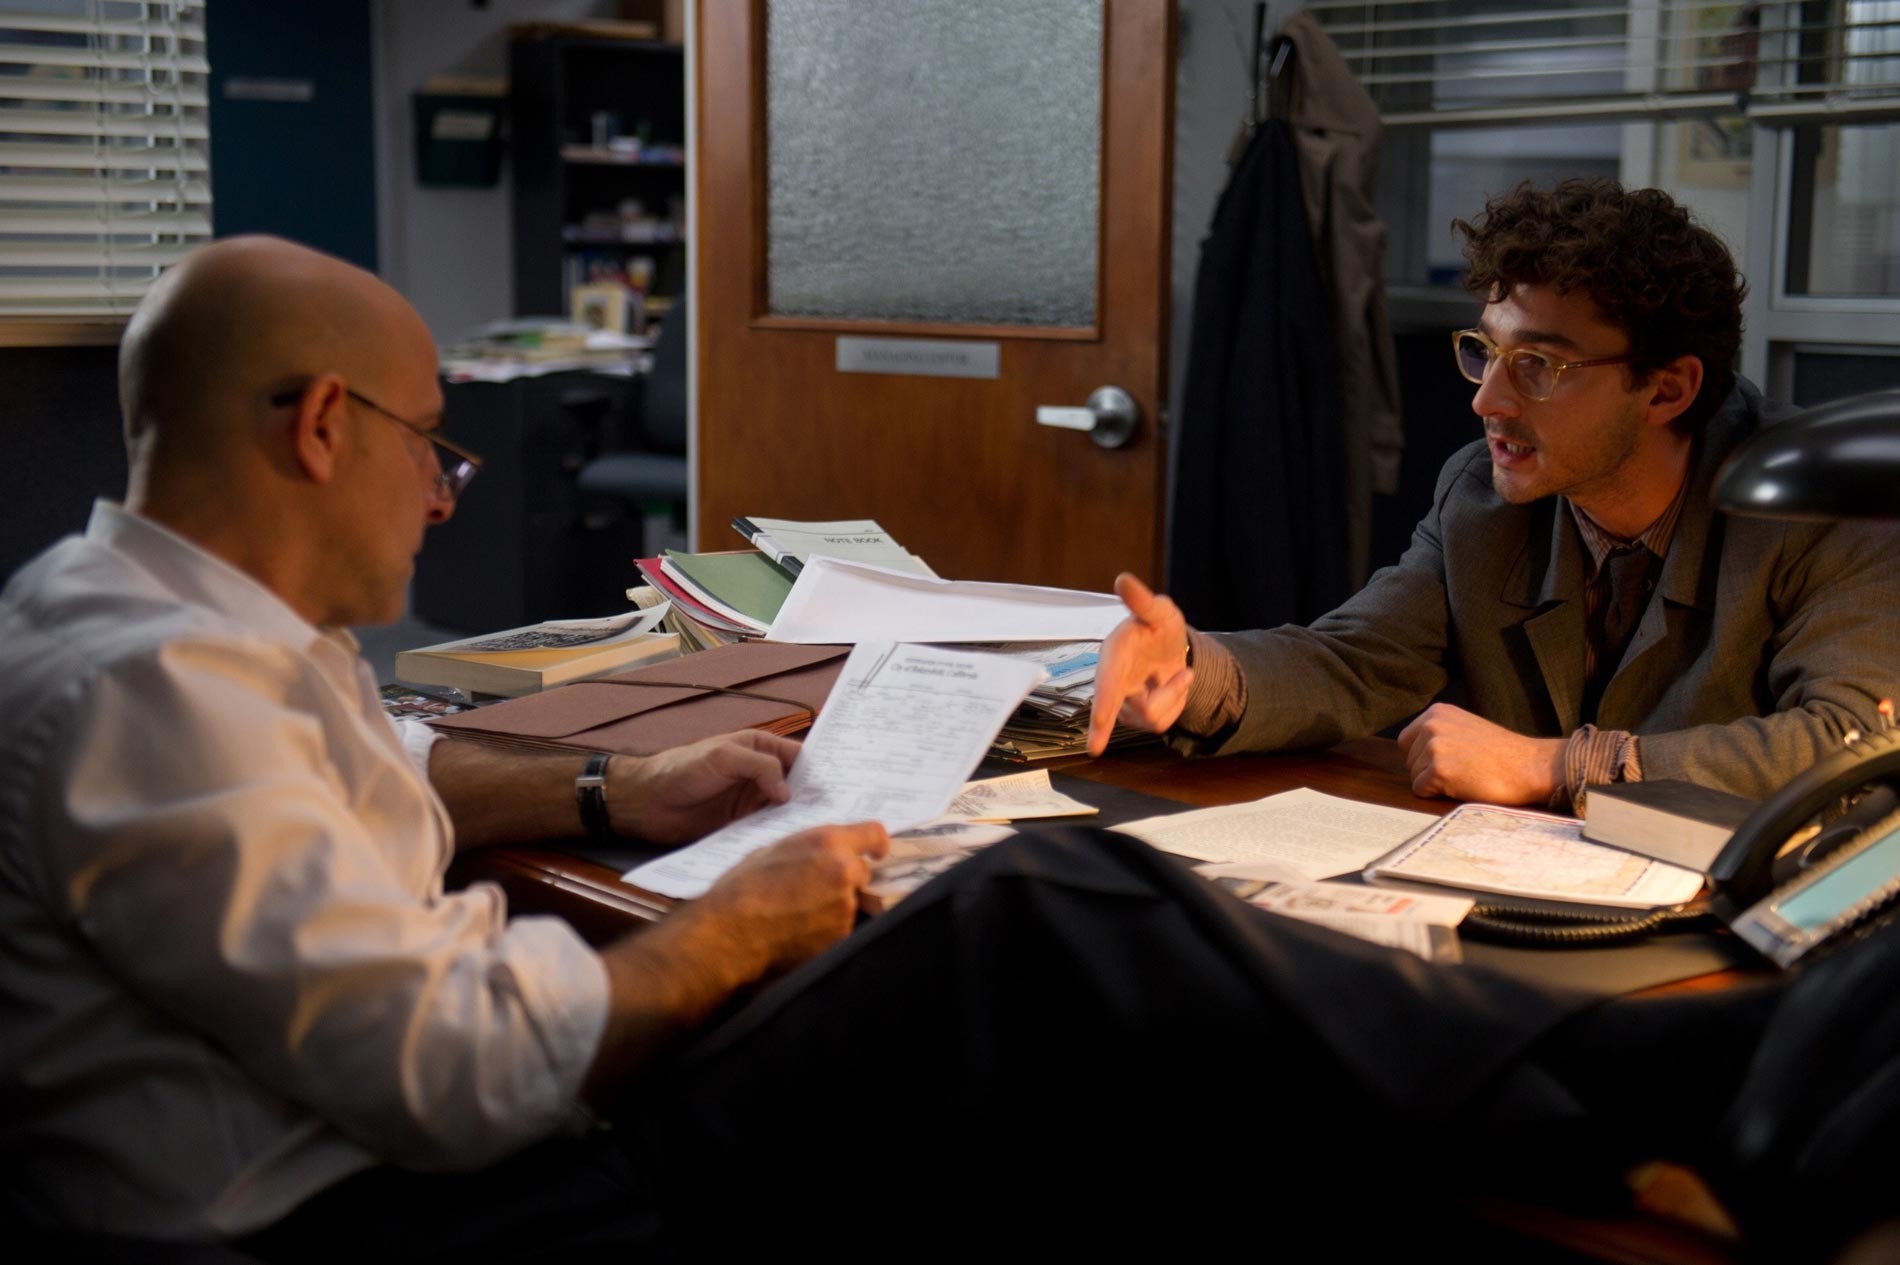 Stanley Tucci stars as Ray Fuller and Shia LaBeouf stars as Ben Shepard in Sony Pictures Classics' The Company You Keep (2013)